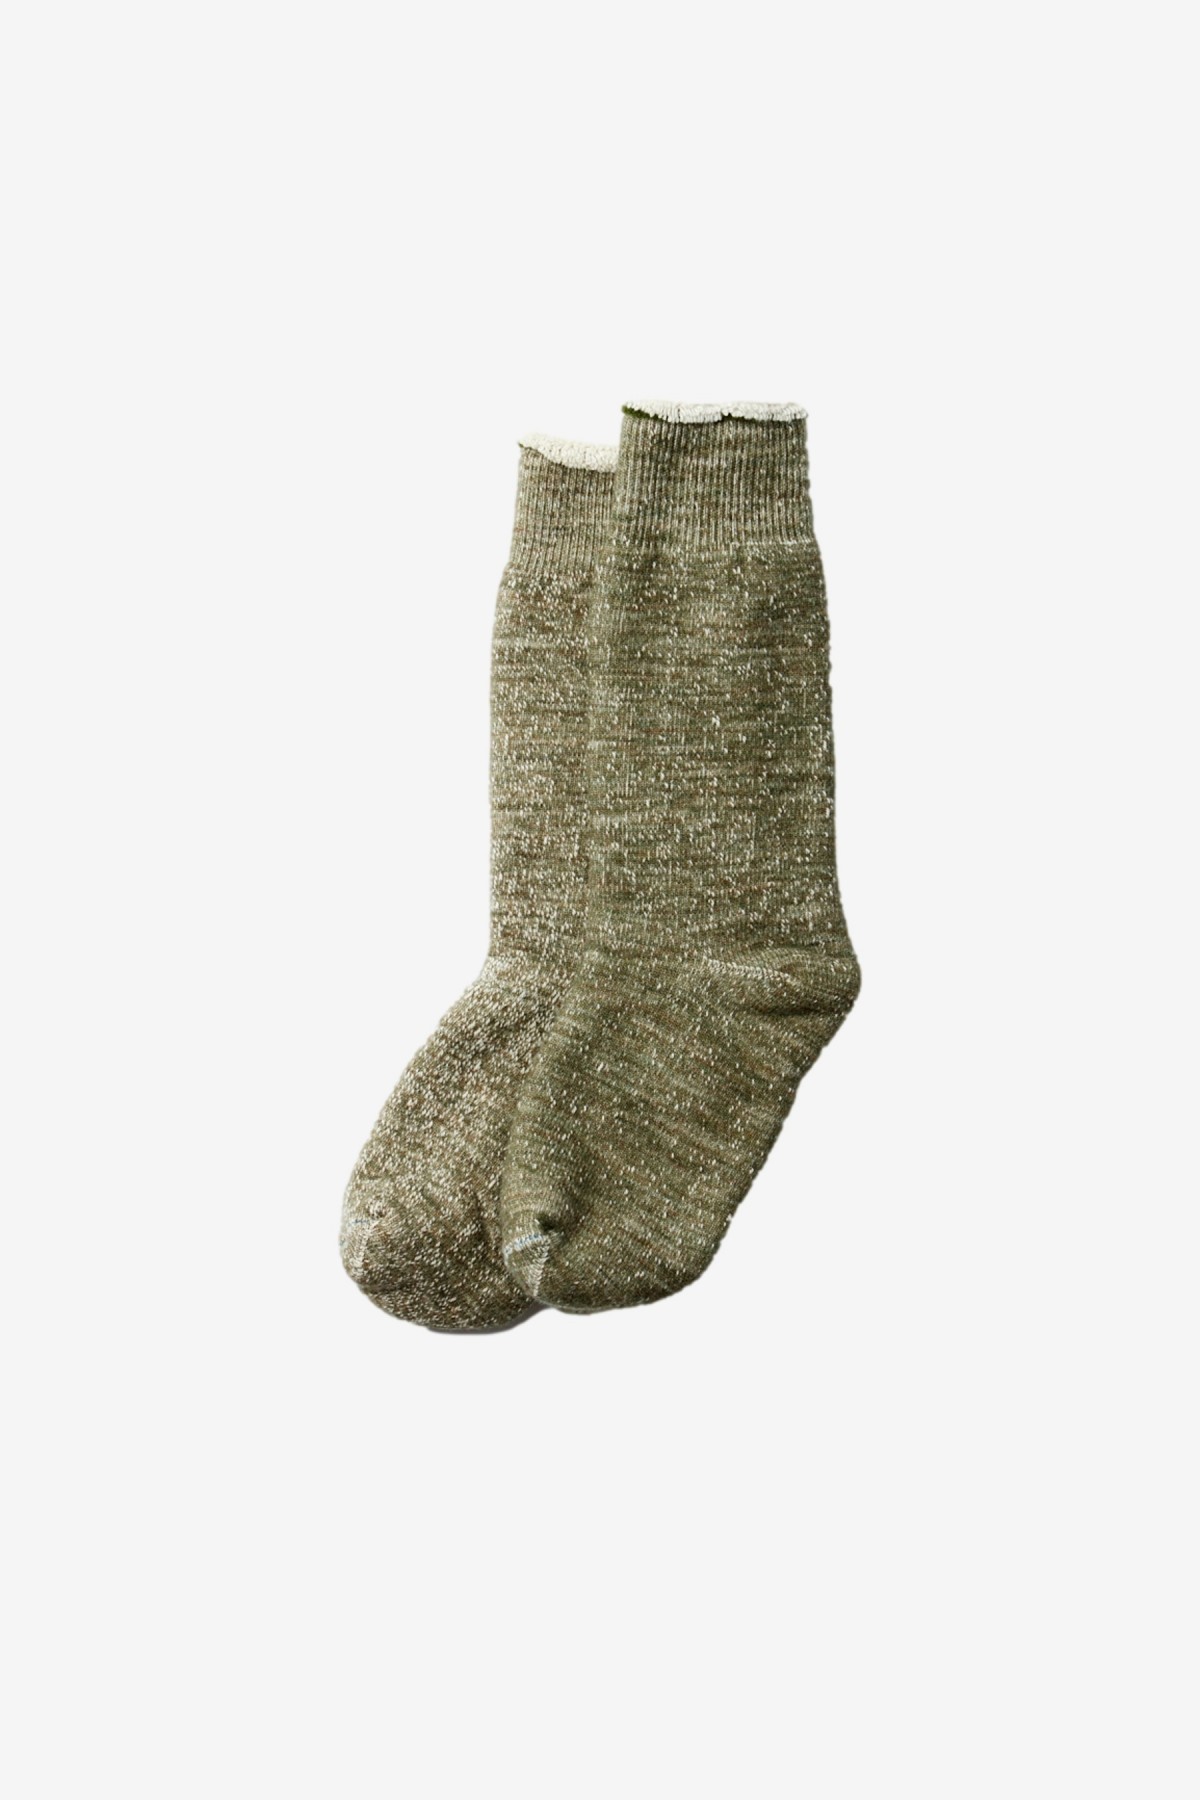 RoToTo Double Face Socks in Army Green